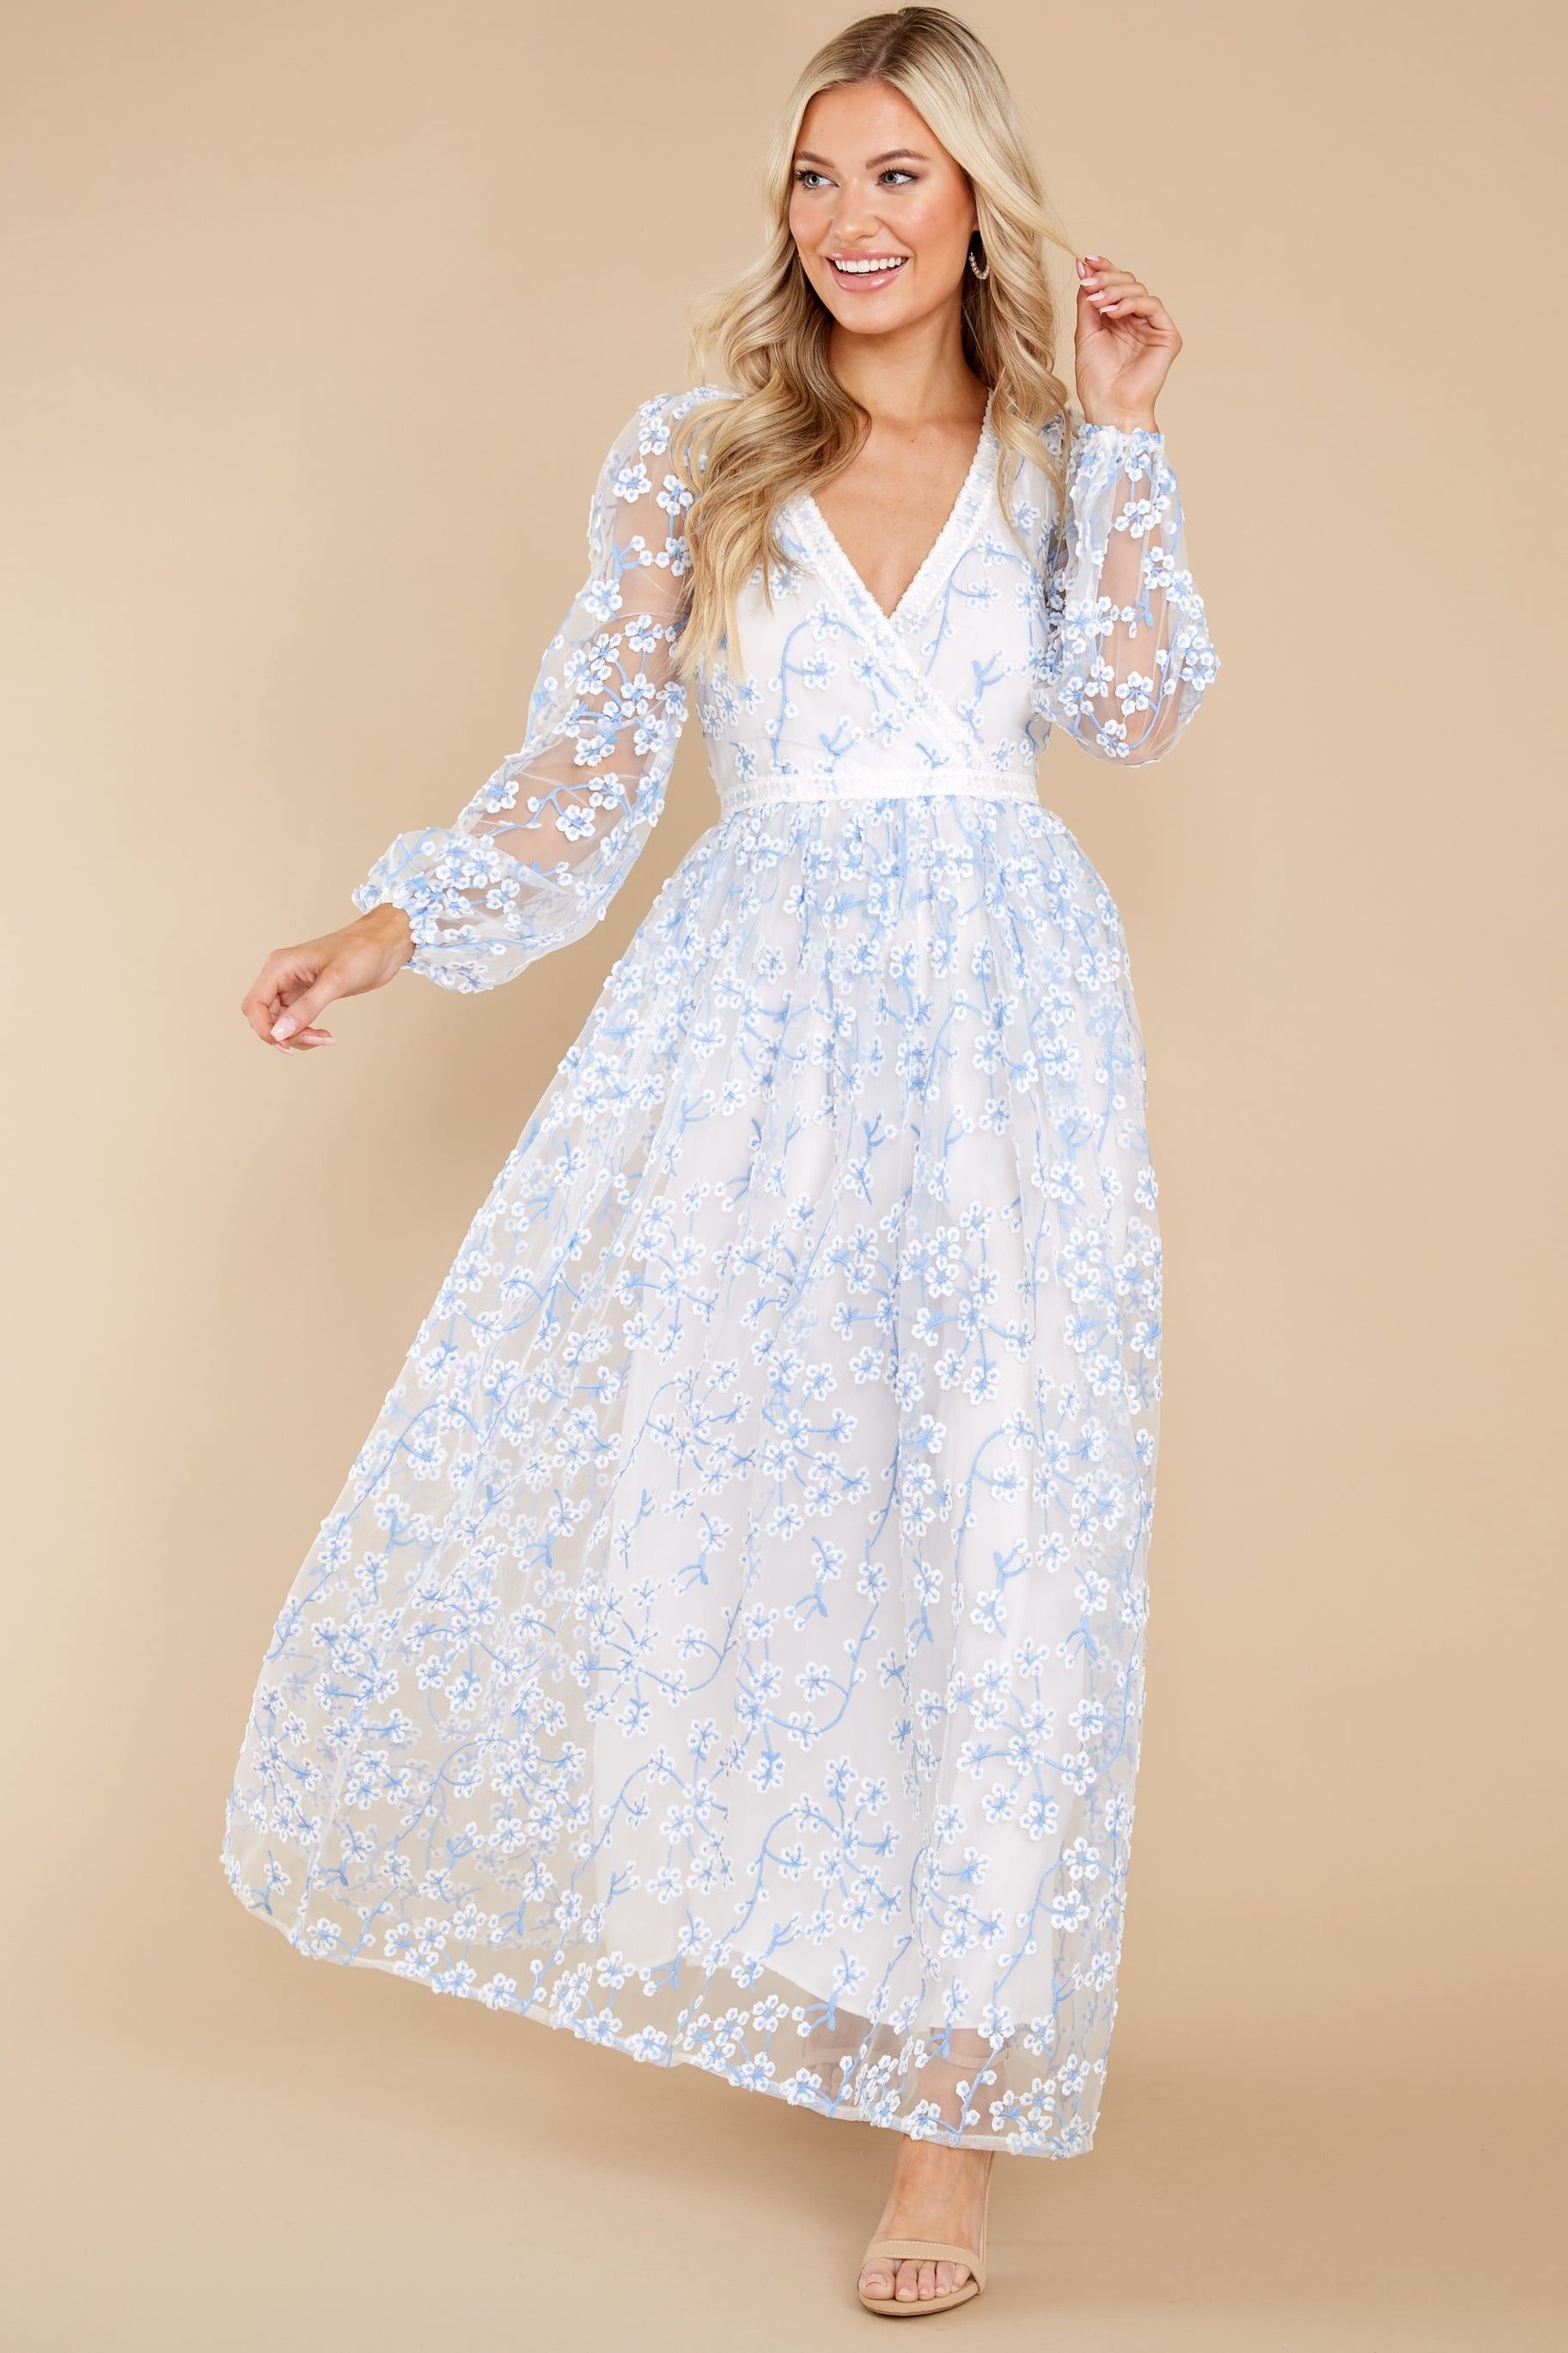 Heavenly Sights Blue And White Floral Embroidered Maxi Dress- Easter Dress | Red Dress 